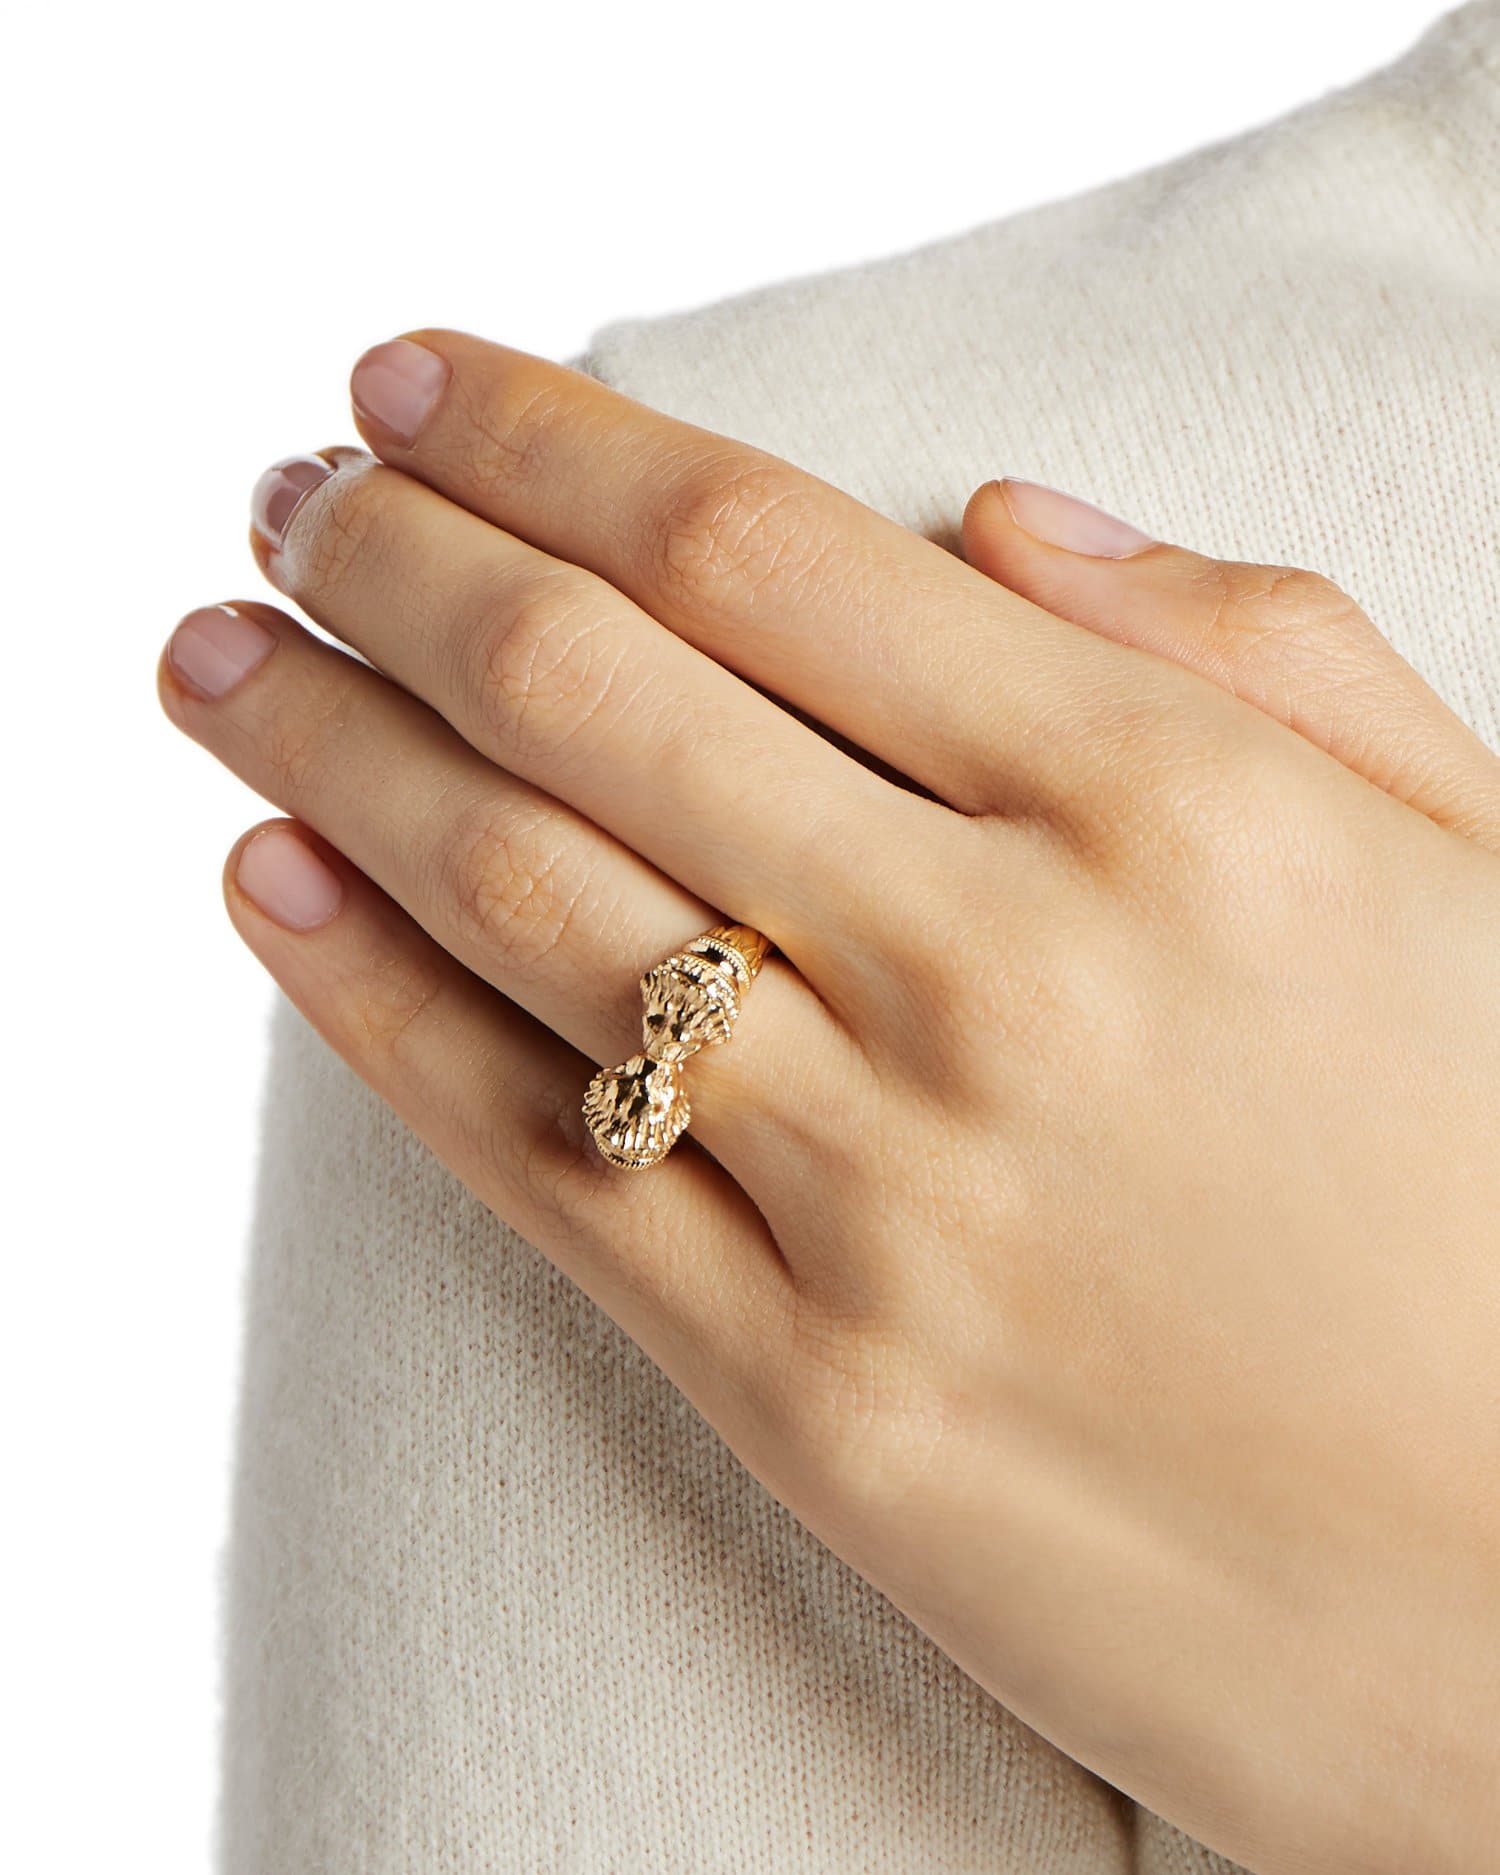 Gold Lion Ring by FUTURA Jewelry - Sustainable Gold Ring